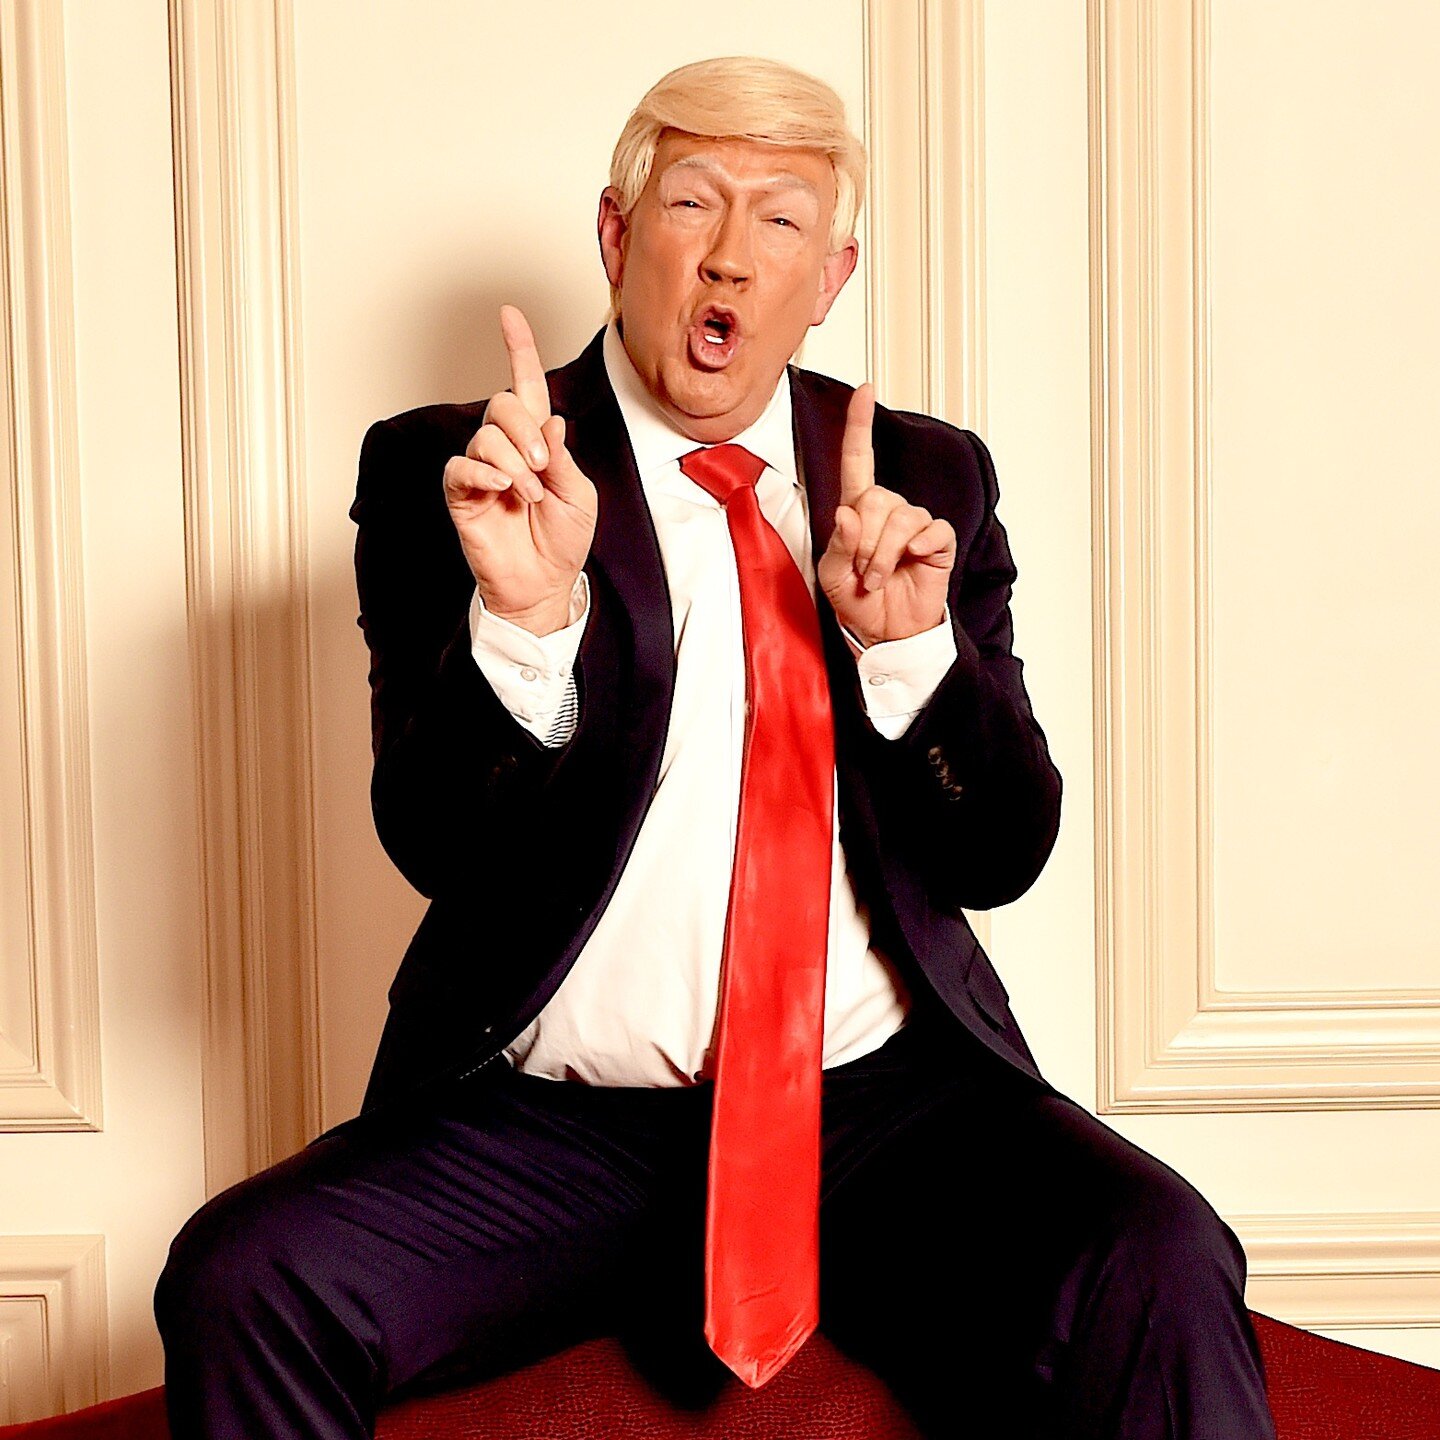 It was such a pleasure to photograph the all round entertainer Mike Osman. To be honest I should say Donald Trump as he never wavered from his impersonation of the former President for the whole evening as he hosted the Help For Heroes ball.
Such a f